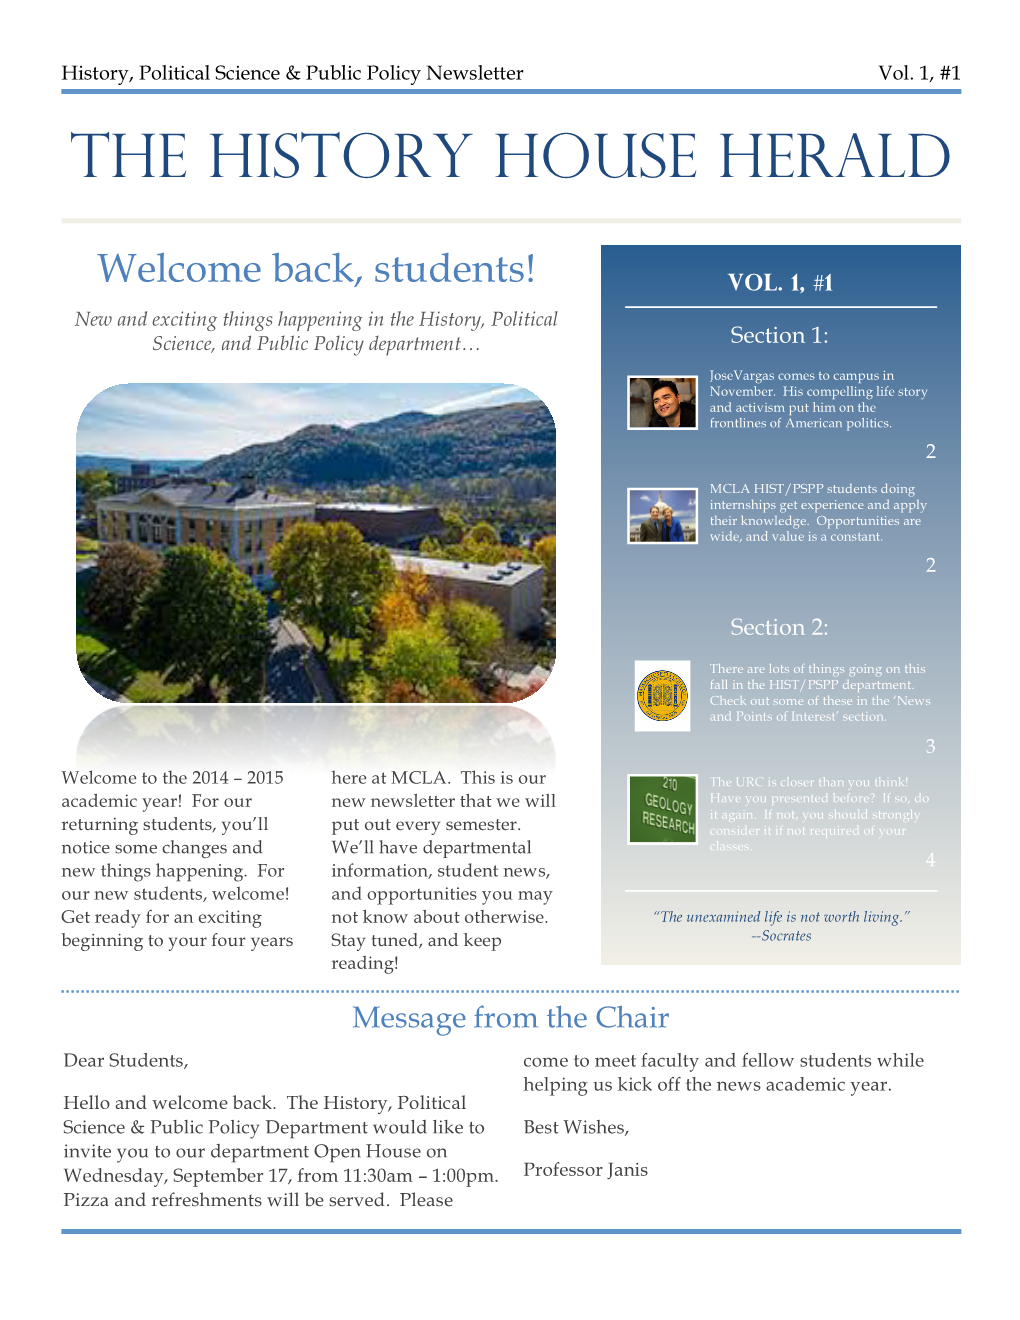 The History House Herald